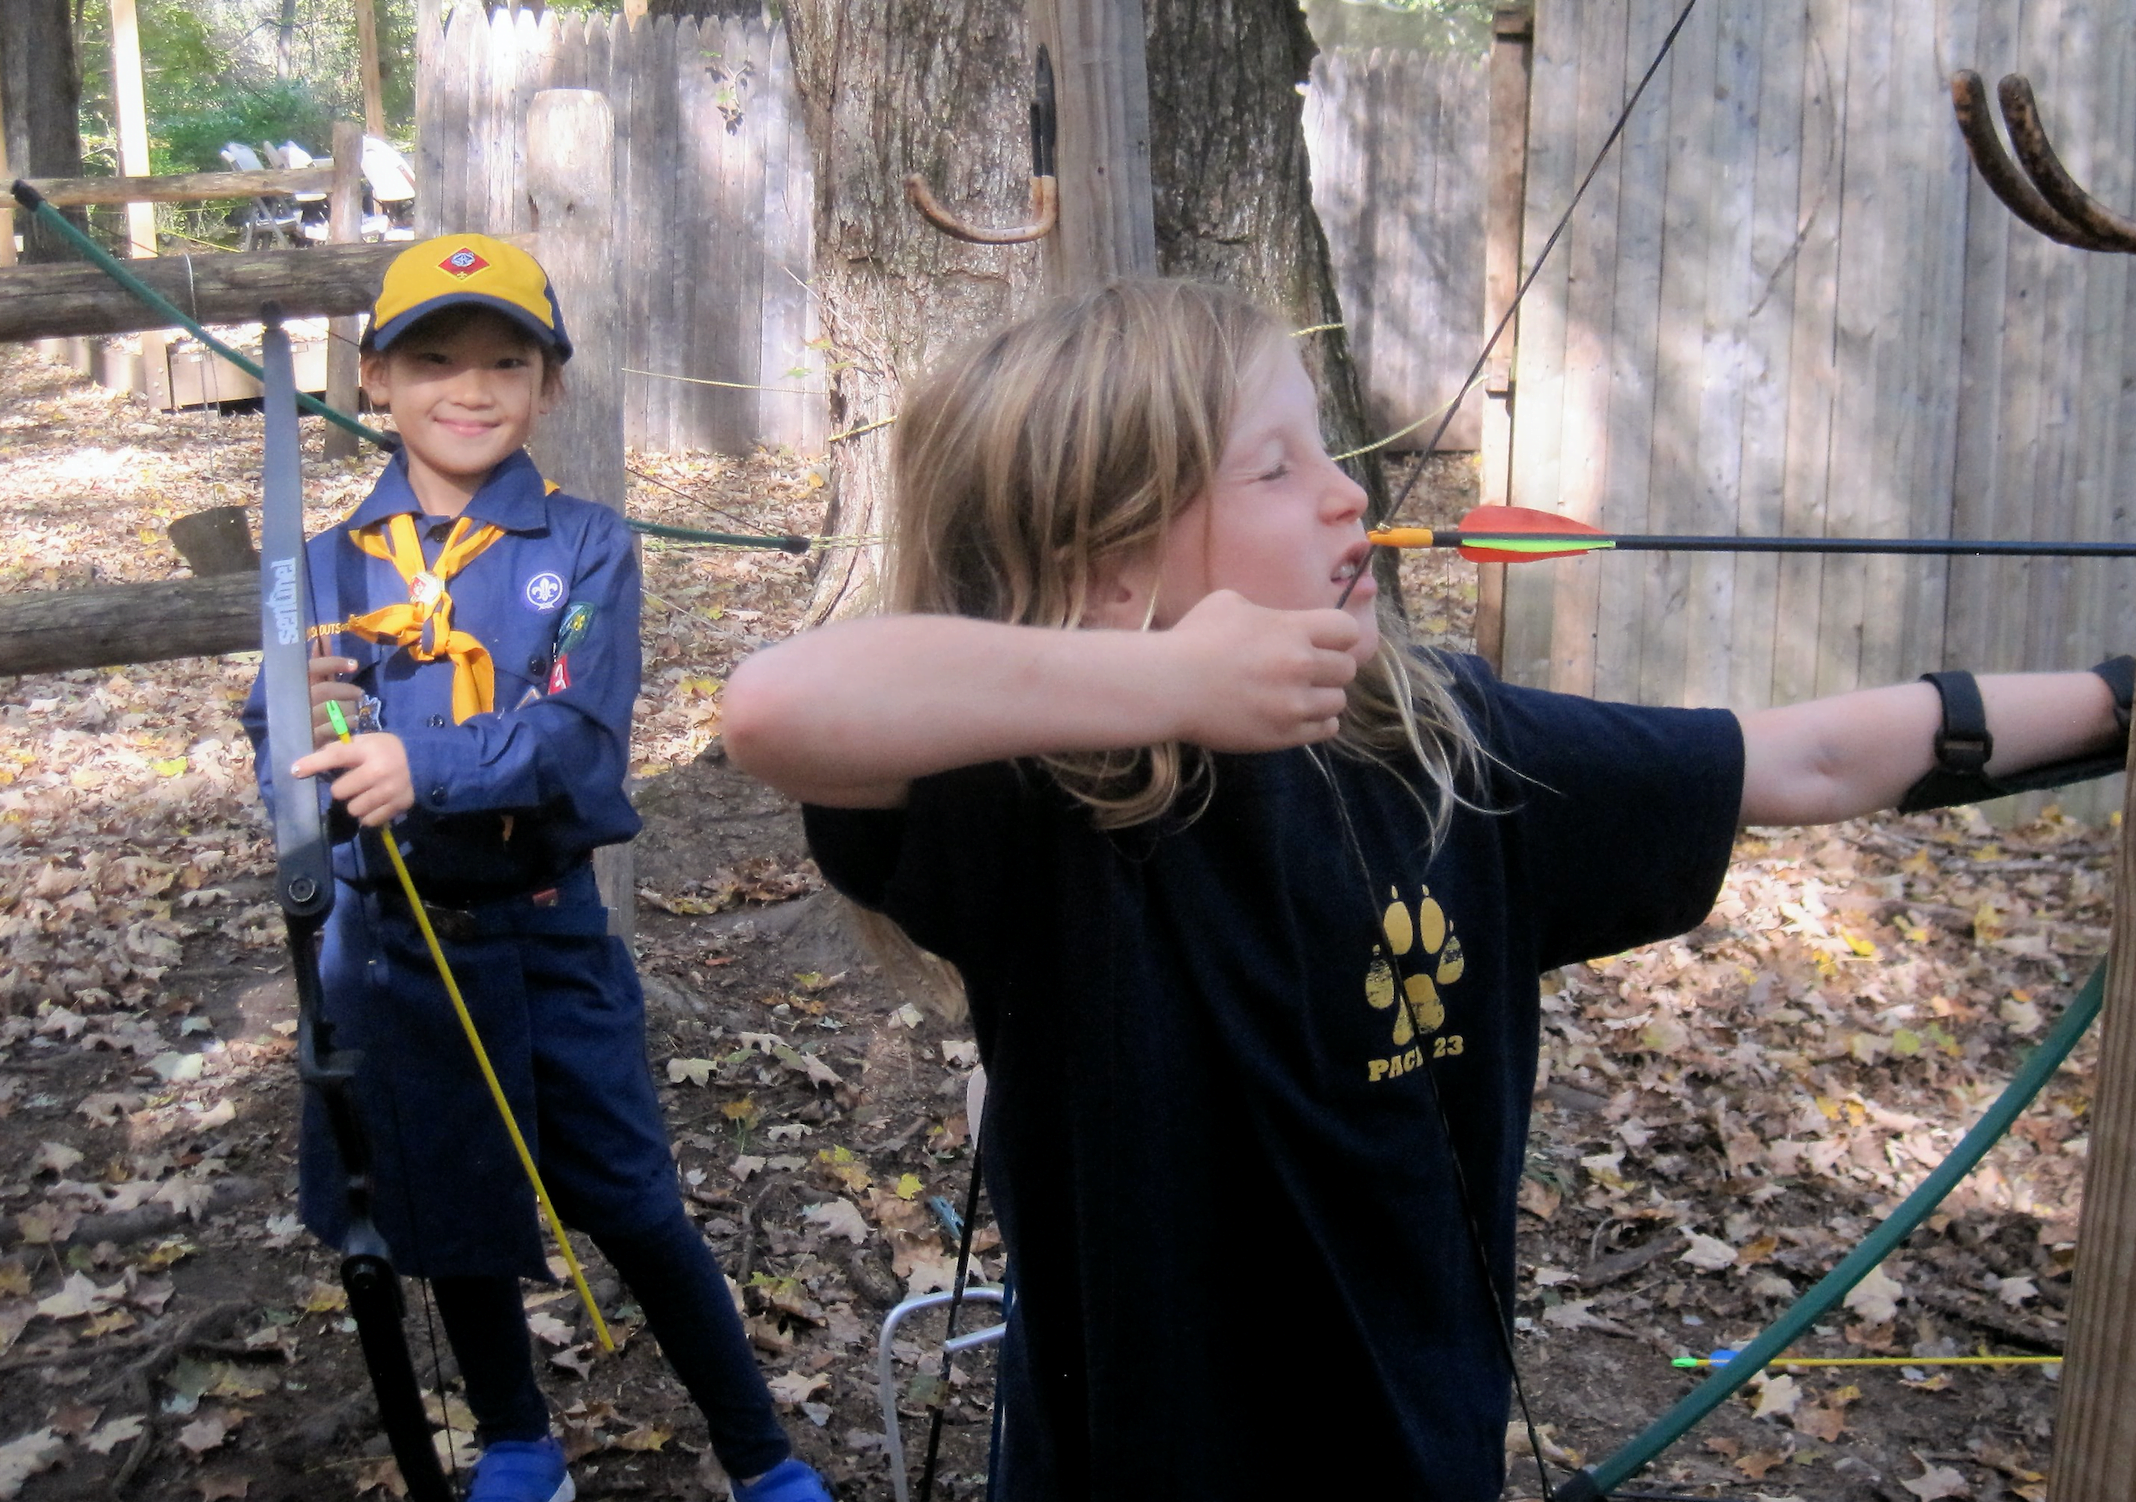 Cub Scout Coco Lee watches Charlotte DiPreta take aim on the archery range at Greenwich Scouting's Fall Festival at Seton Scout Reservation.